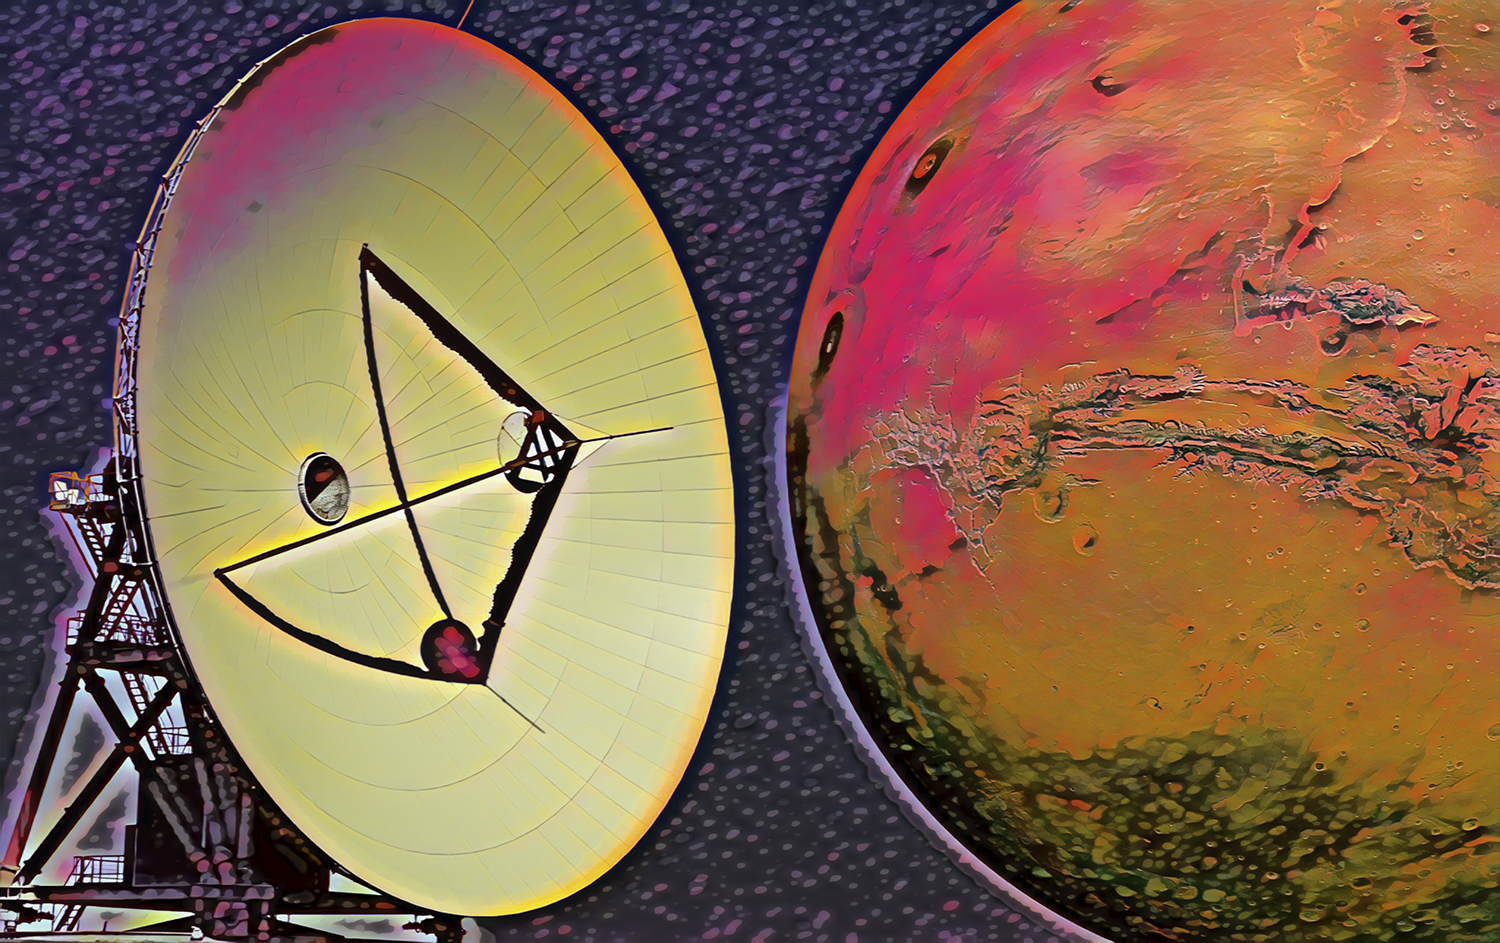 Abstract image of Ghy6 Antenna and Mars